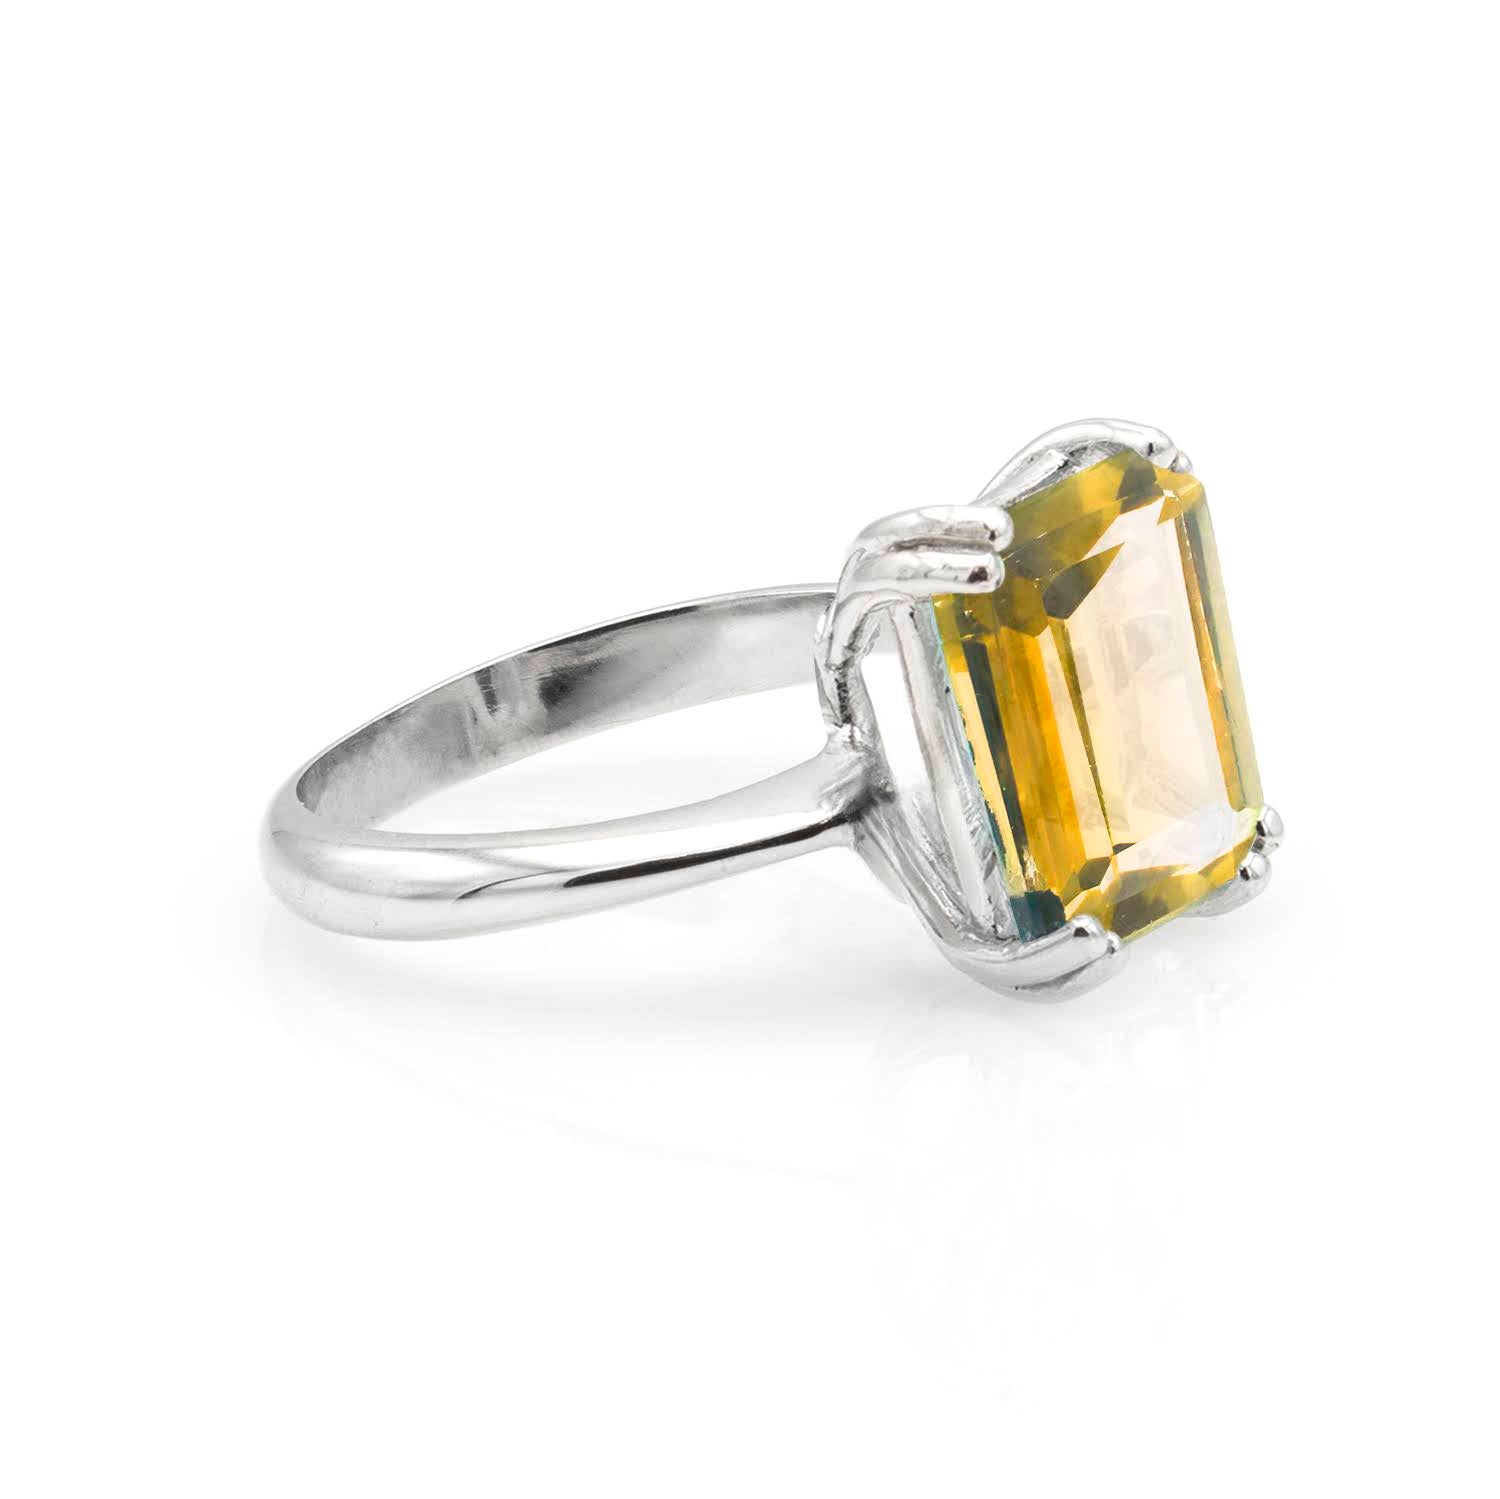 Citrine 3.47ct White Gold Ring - Paris Collection